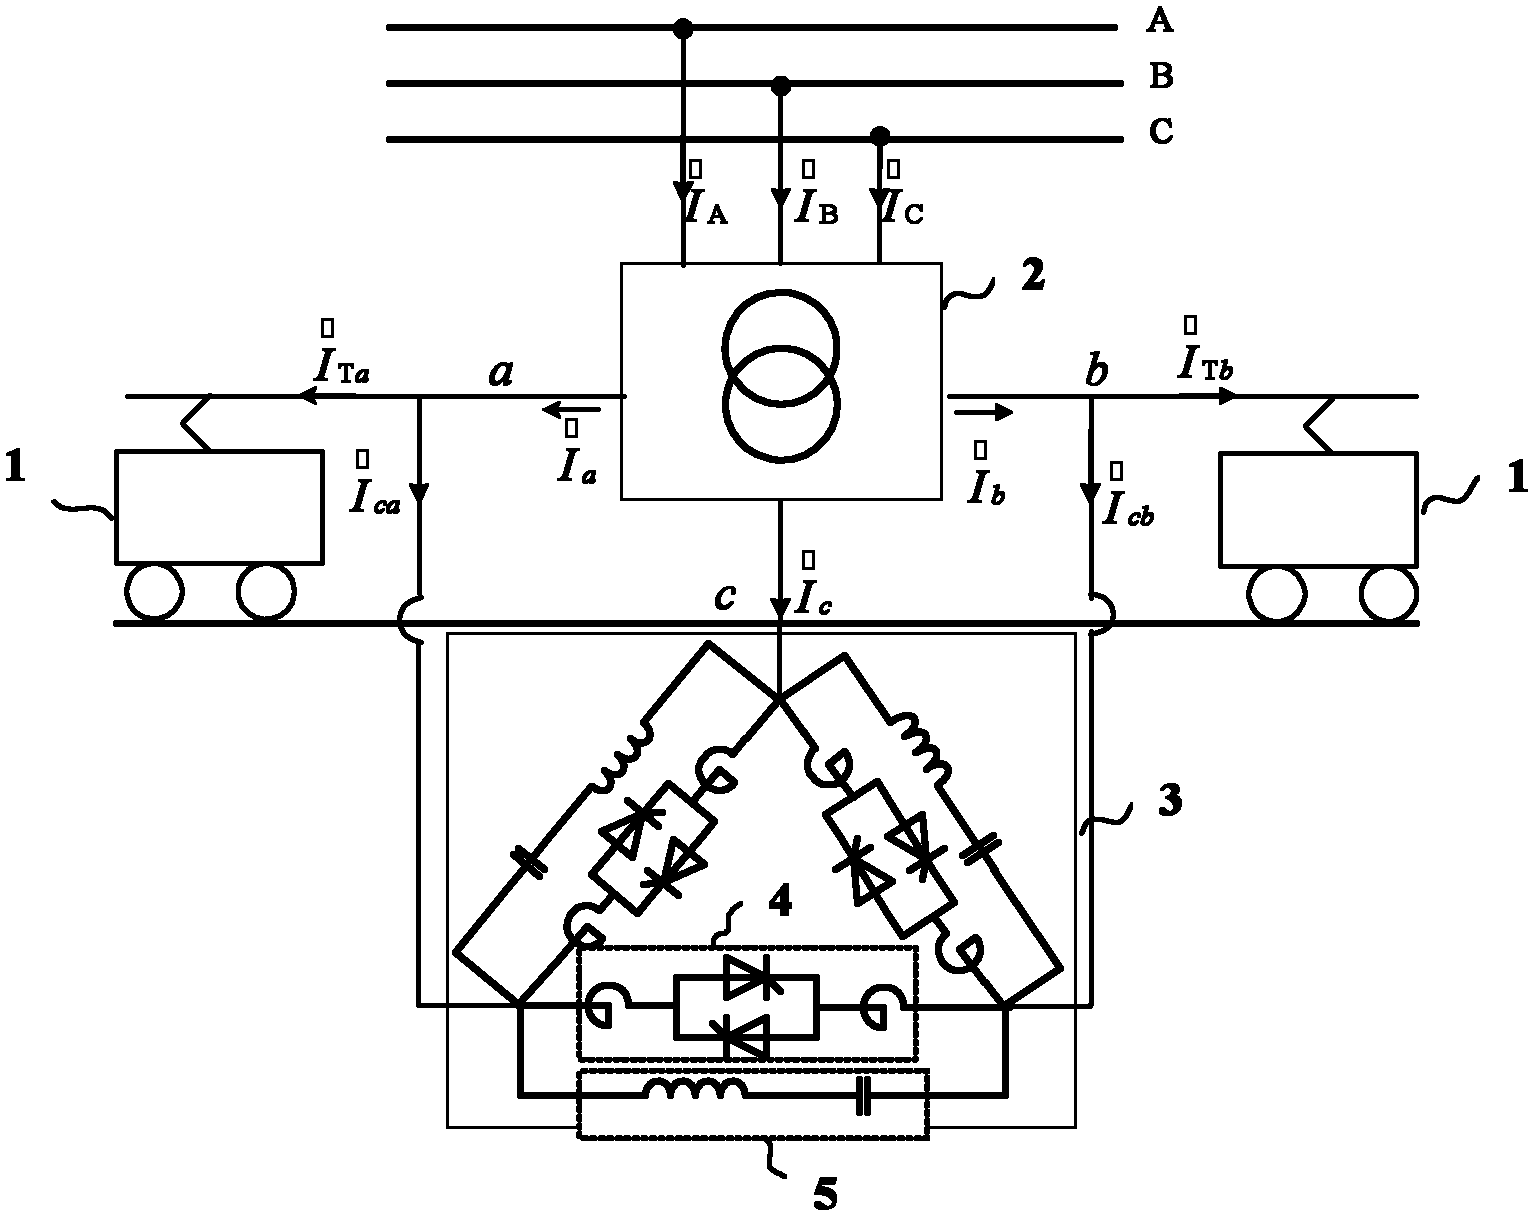 A three-phase svc compensation device for traction side of electrified railway